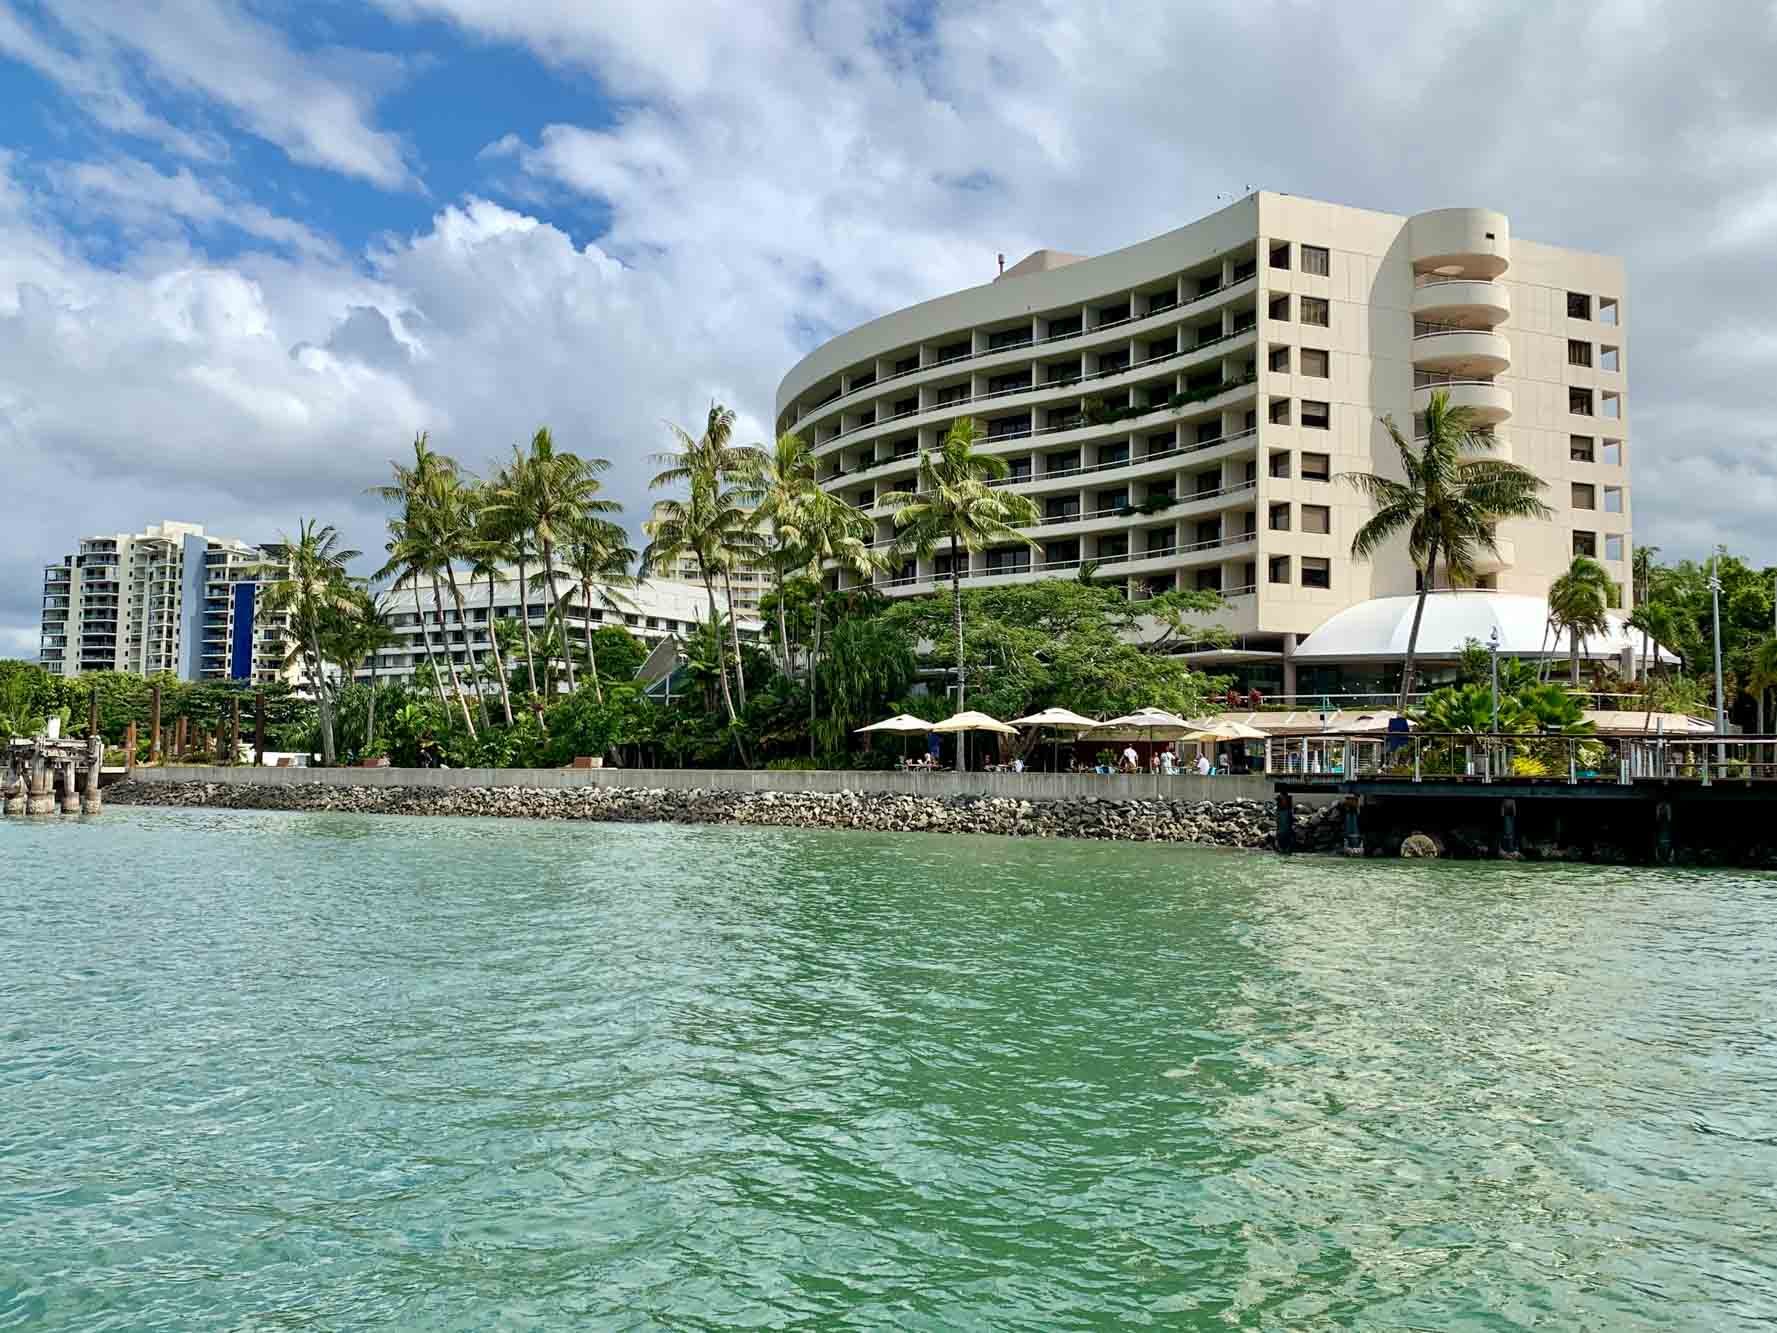 Hilton Cairns sits right on the waterfront